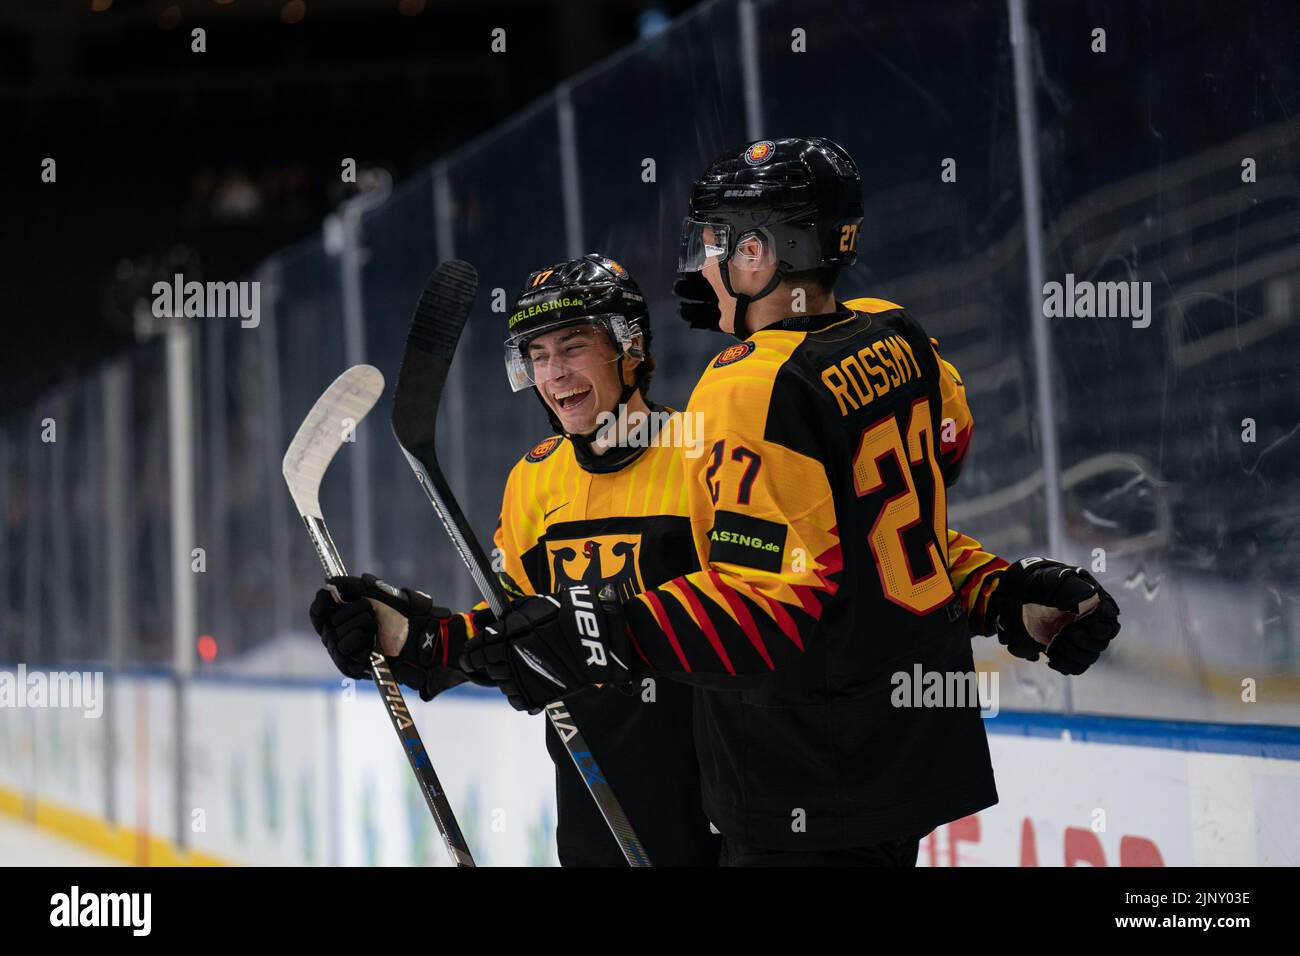 August 13, 2022, Edmonton, Alberta, Canada BENNET ROSSMY (27) and YANNICK PROSKE (17) of Germany celebrate a first period goal during a World Junior Championship game at Rogers Place in Edmonton, Alberta